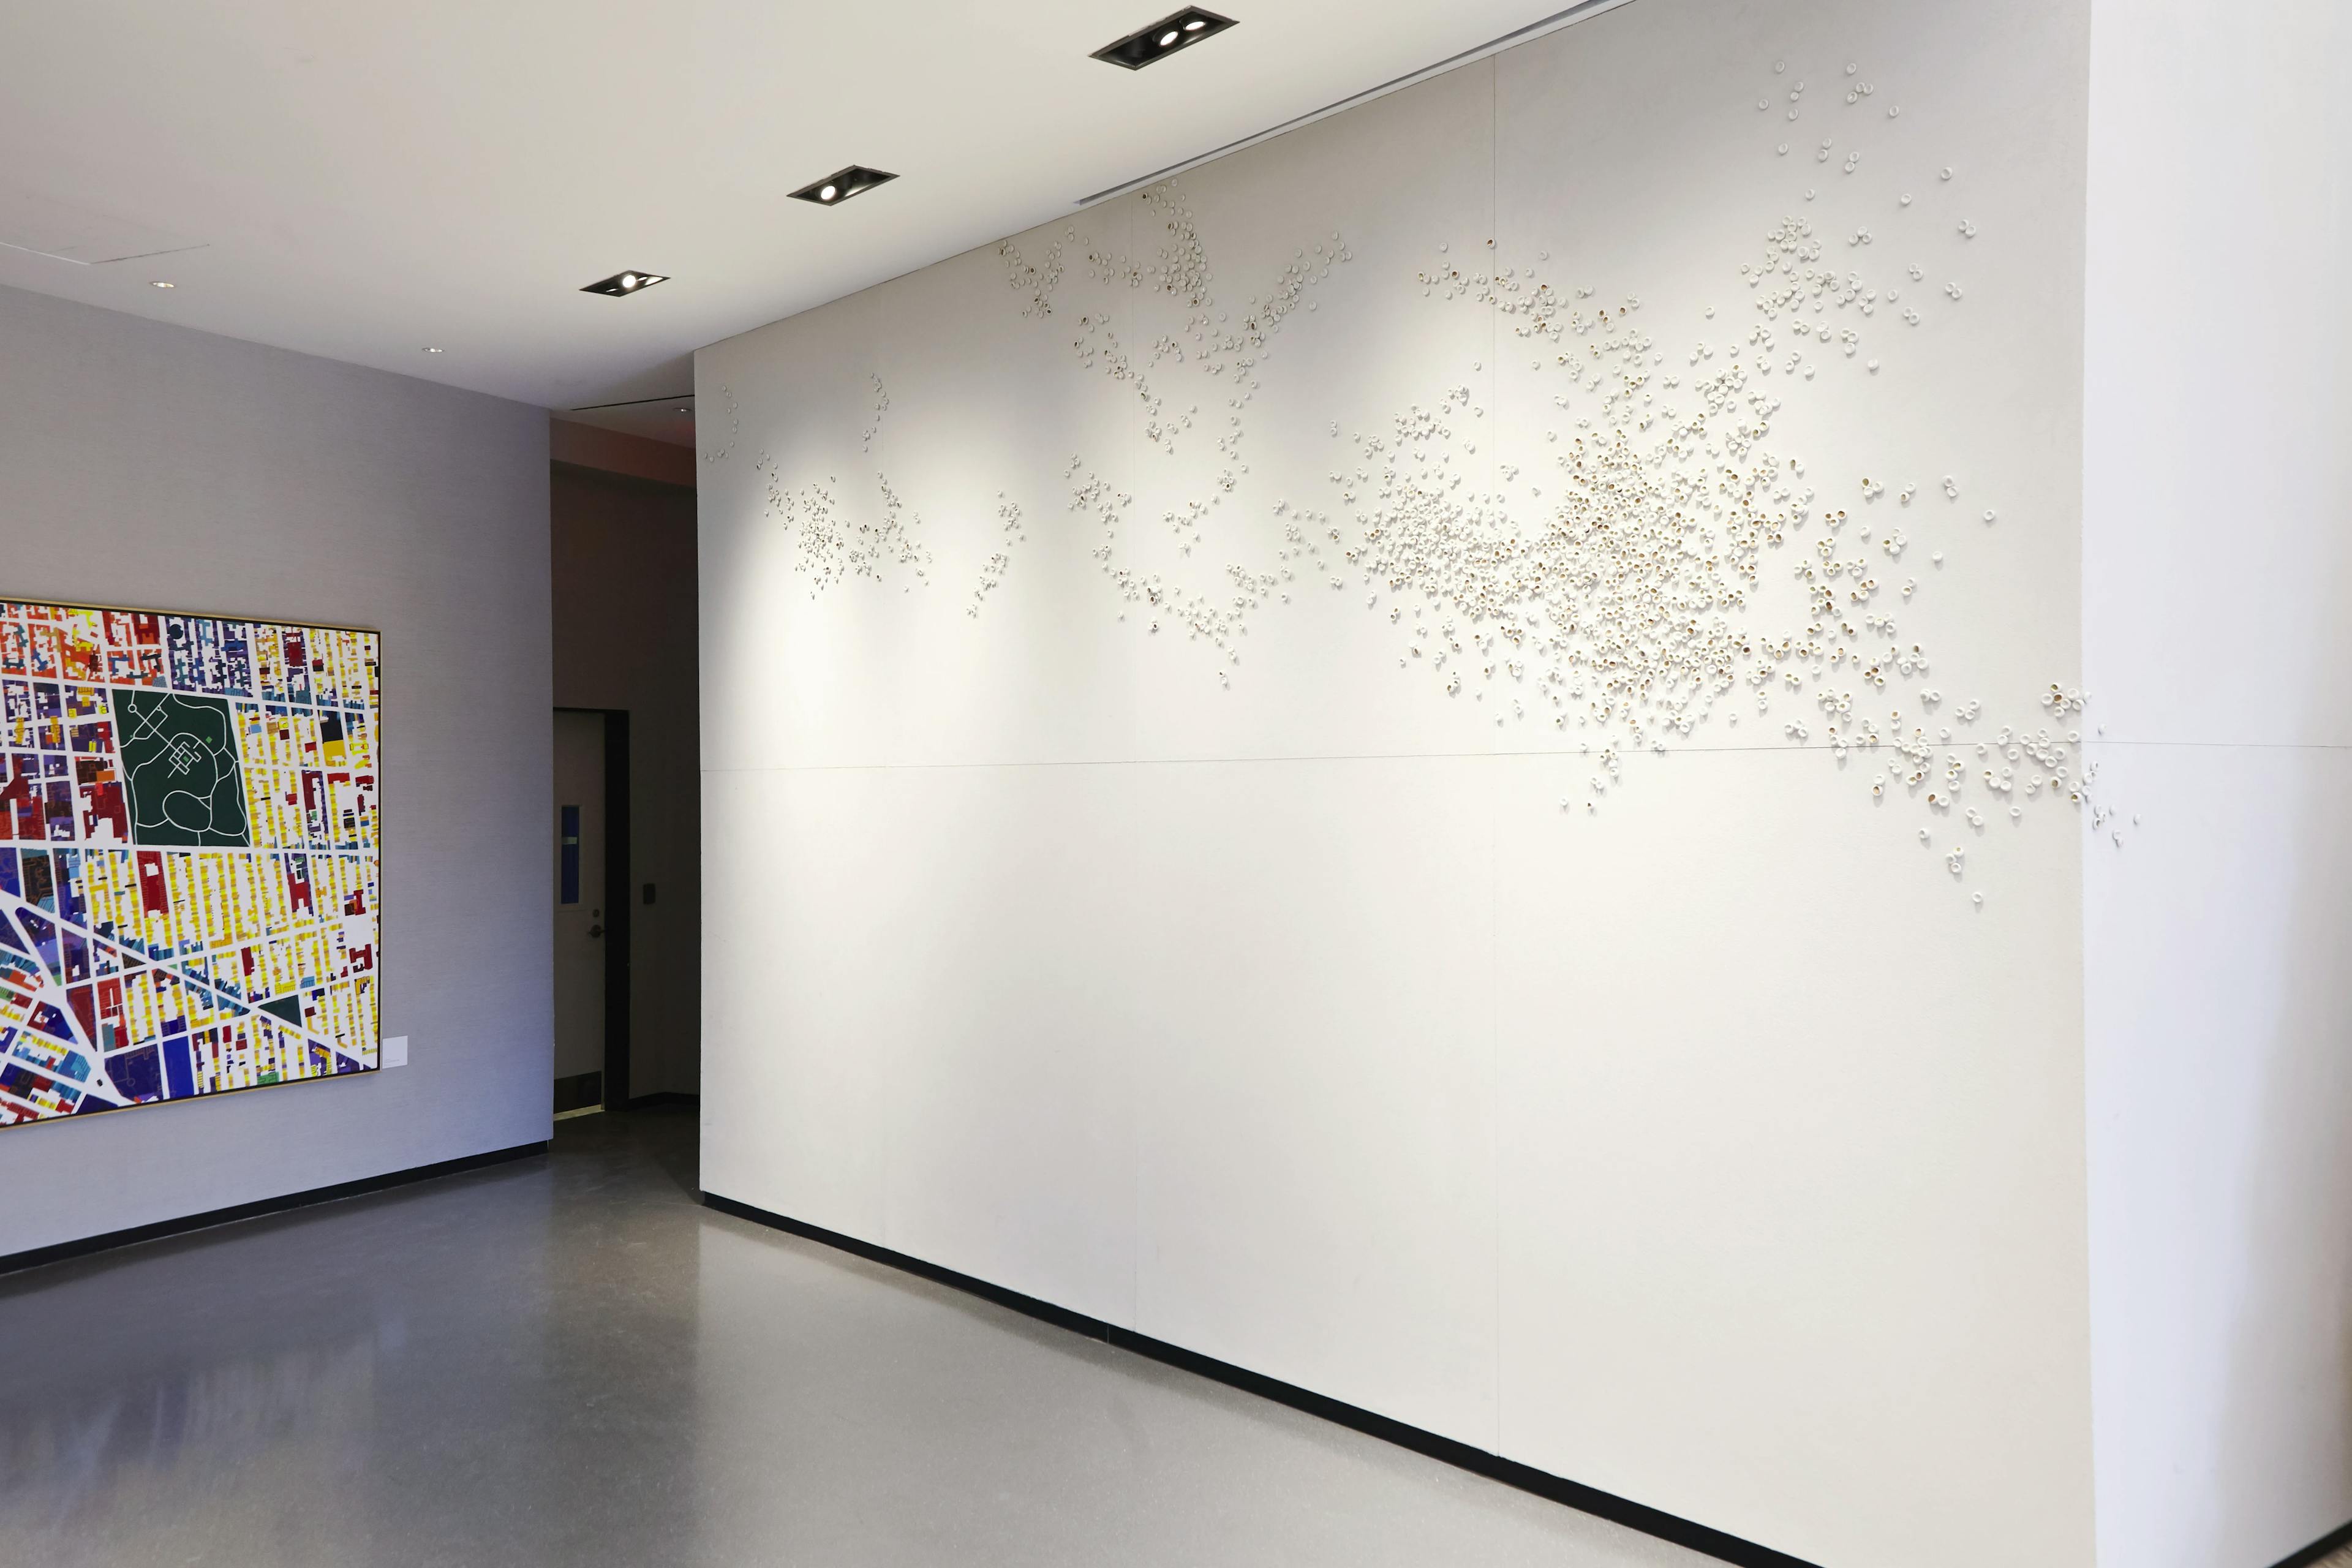 Site-specific installation of tiny porcelain pieces by artist Christina Watka arranged in an organic pattern on a white wall.